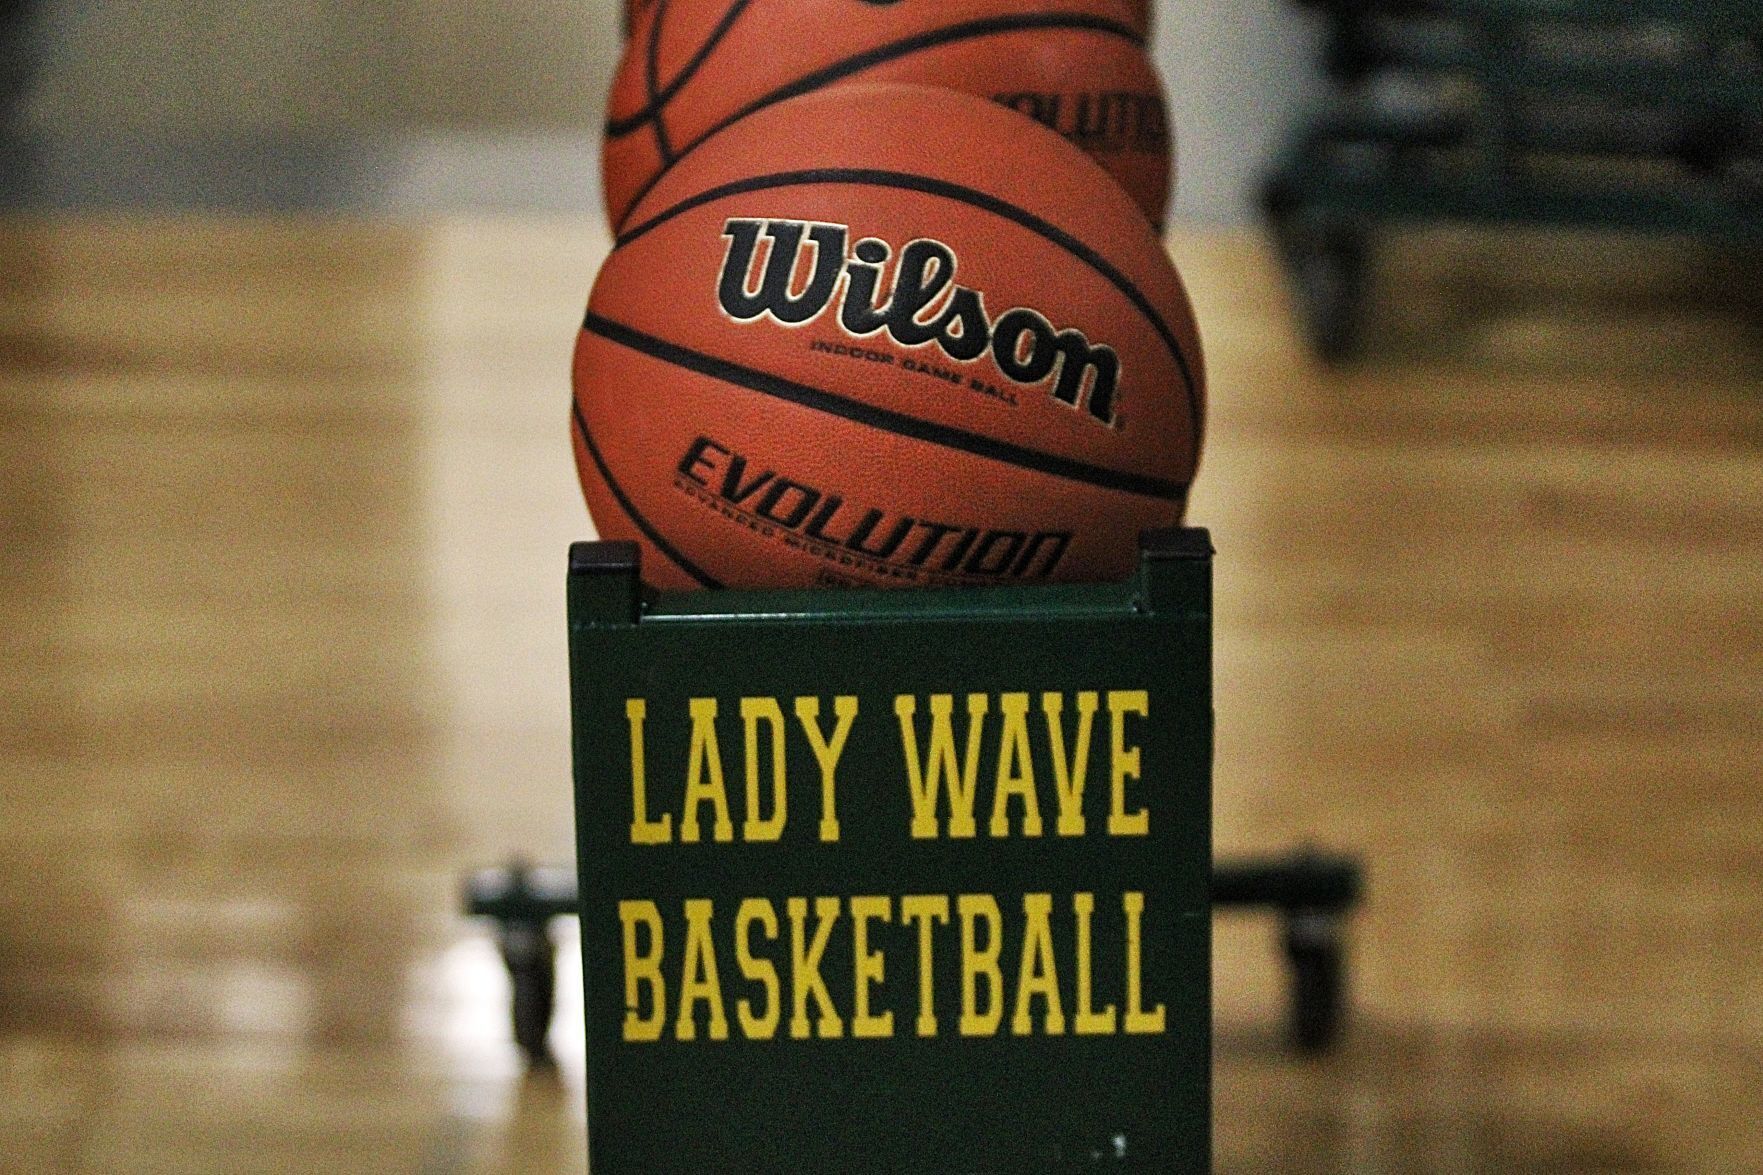 Mattoon Green Wave and Sullivan Boys Basketball Teams off to Hot Start 5-0 and 4-0 Respectively